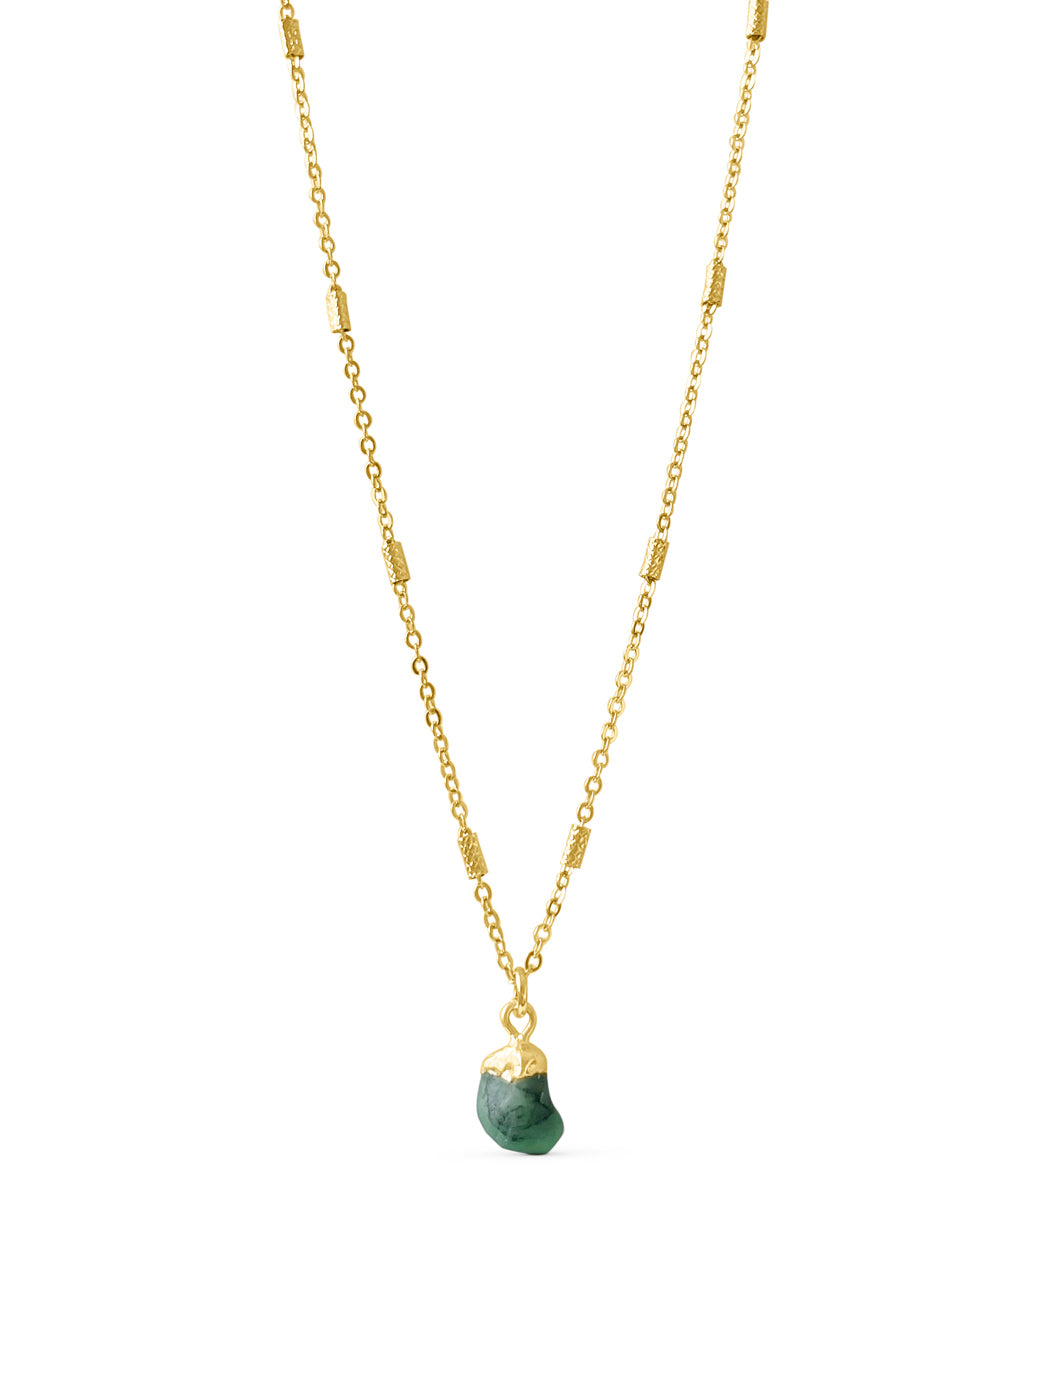 MOHICA RAW EMERALD NECKLACE